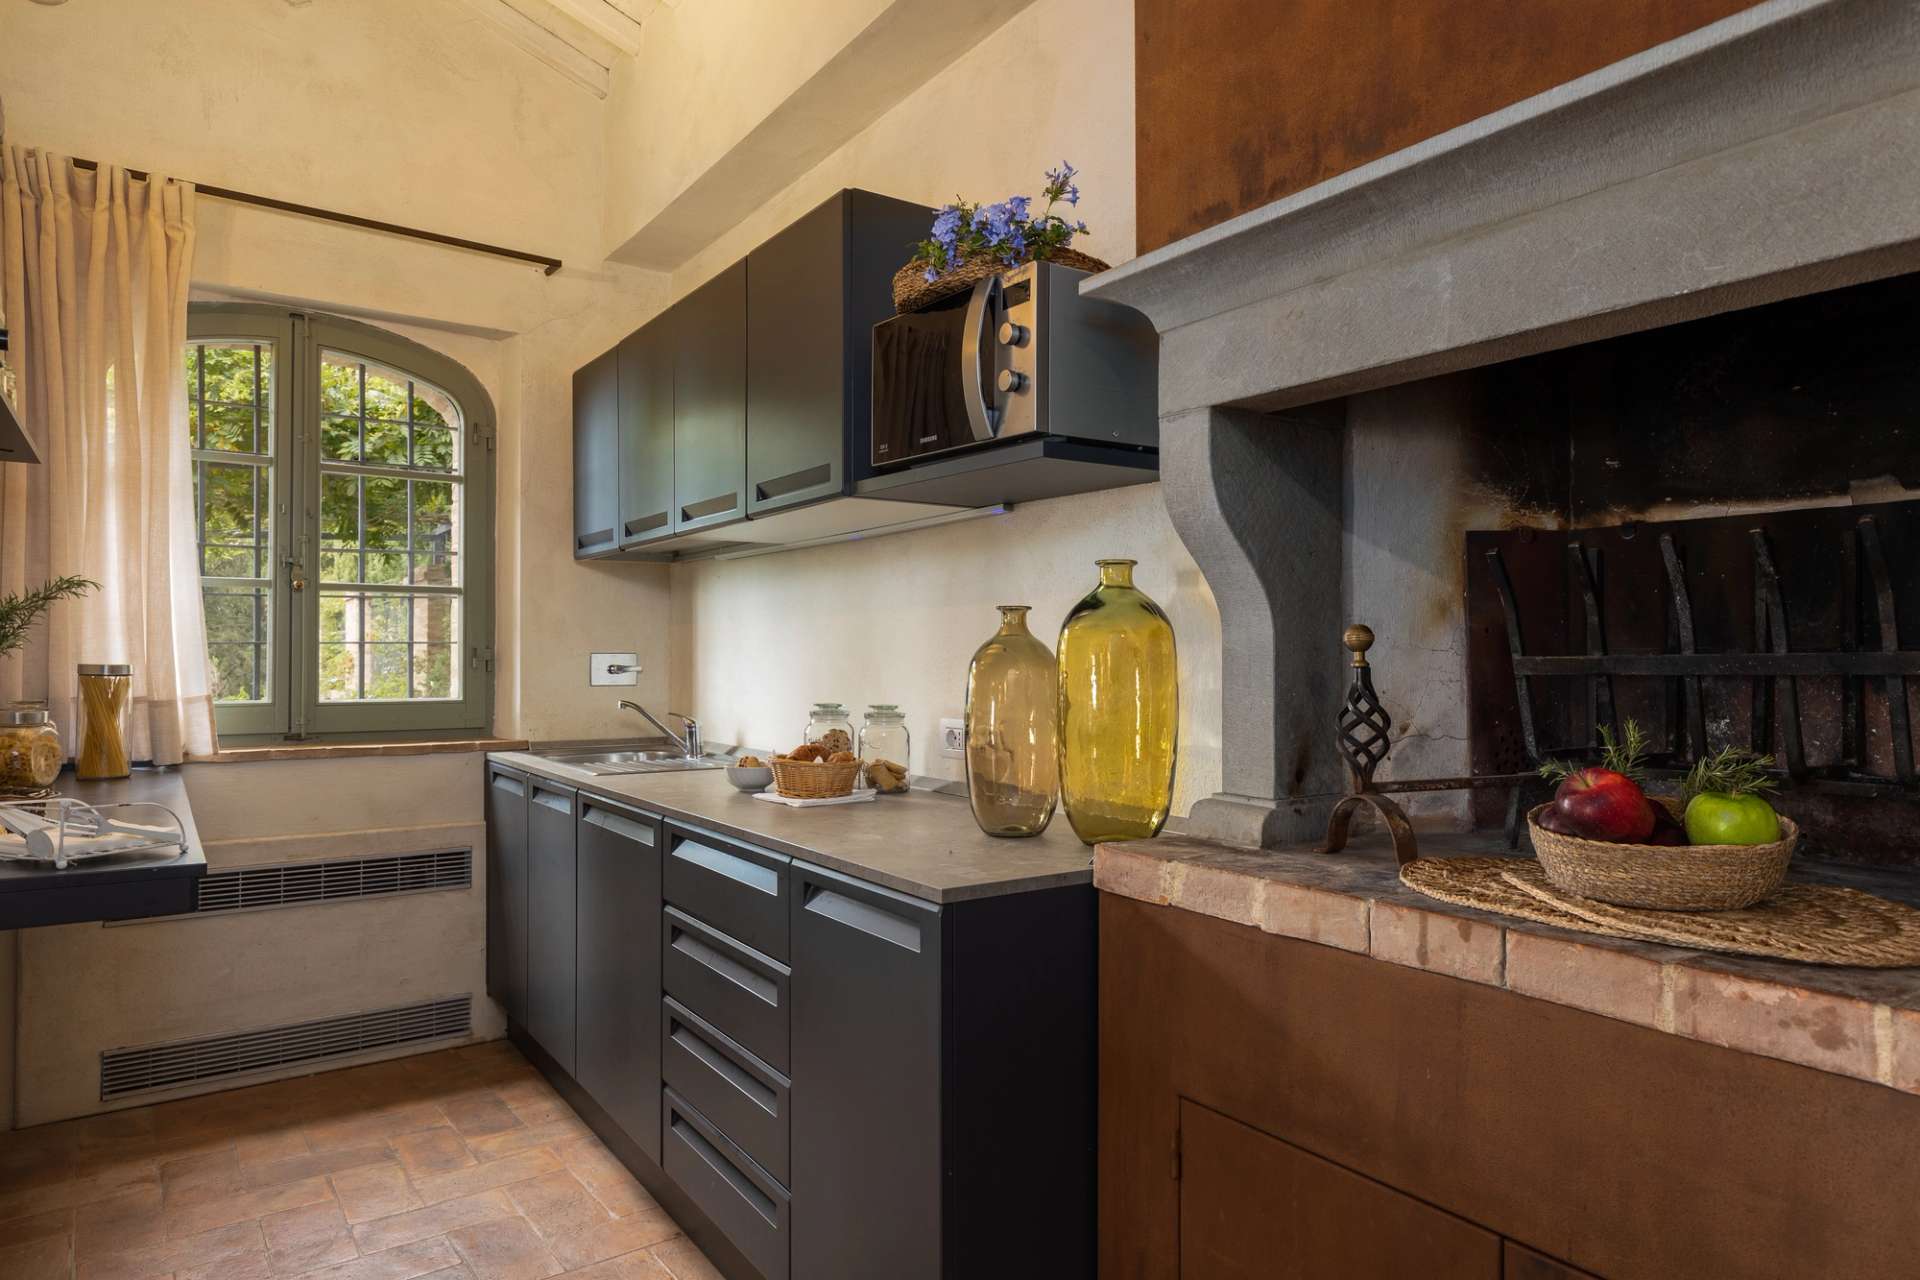 The kitchen of a luxury villa for rent